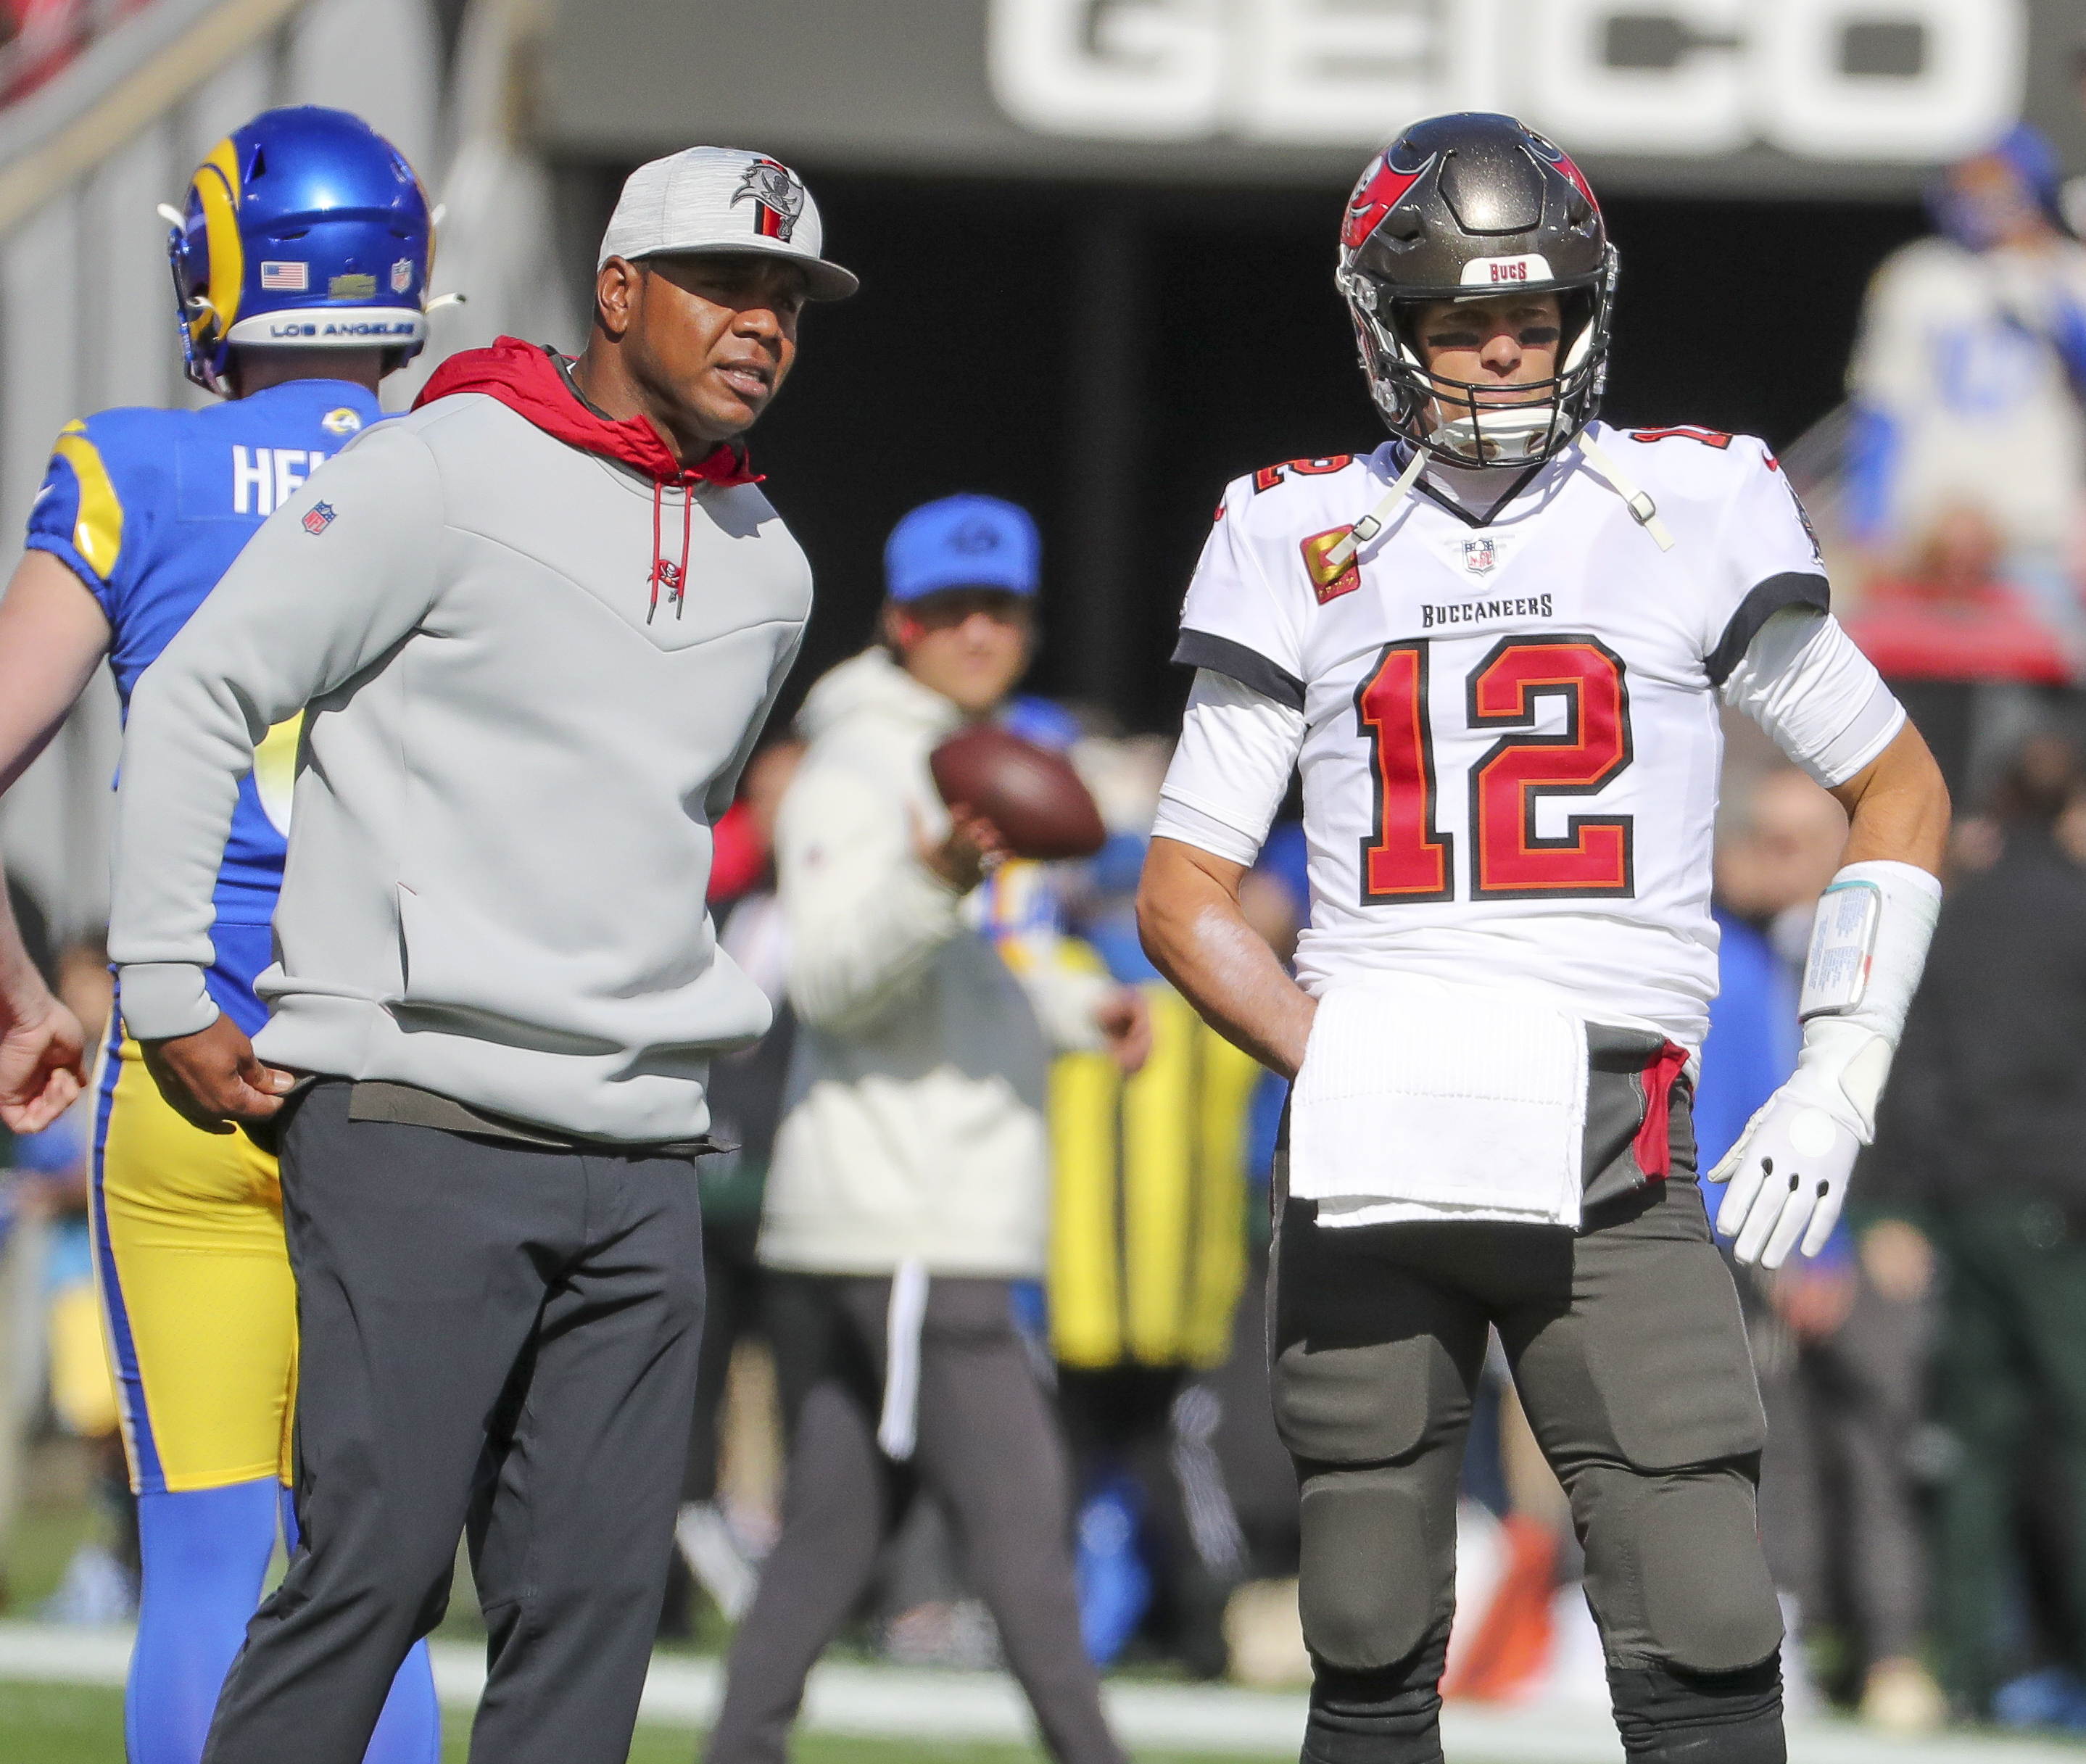 Byron Leftwich could be leaving Bucs to become head coach of Jaguars